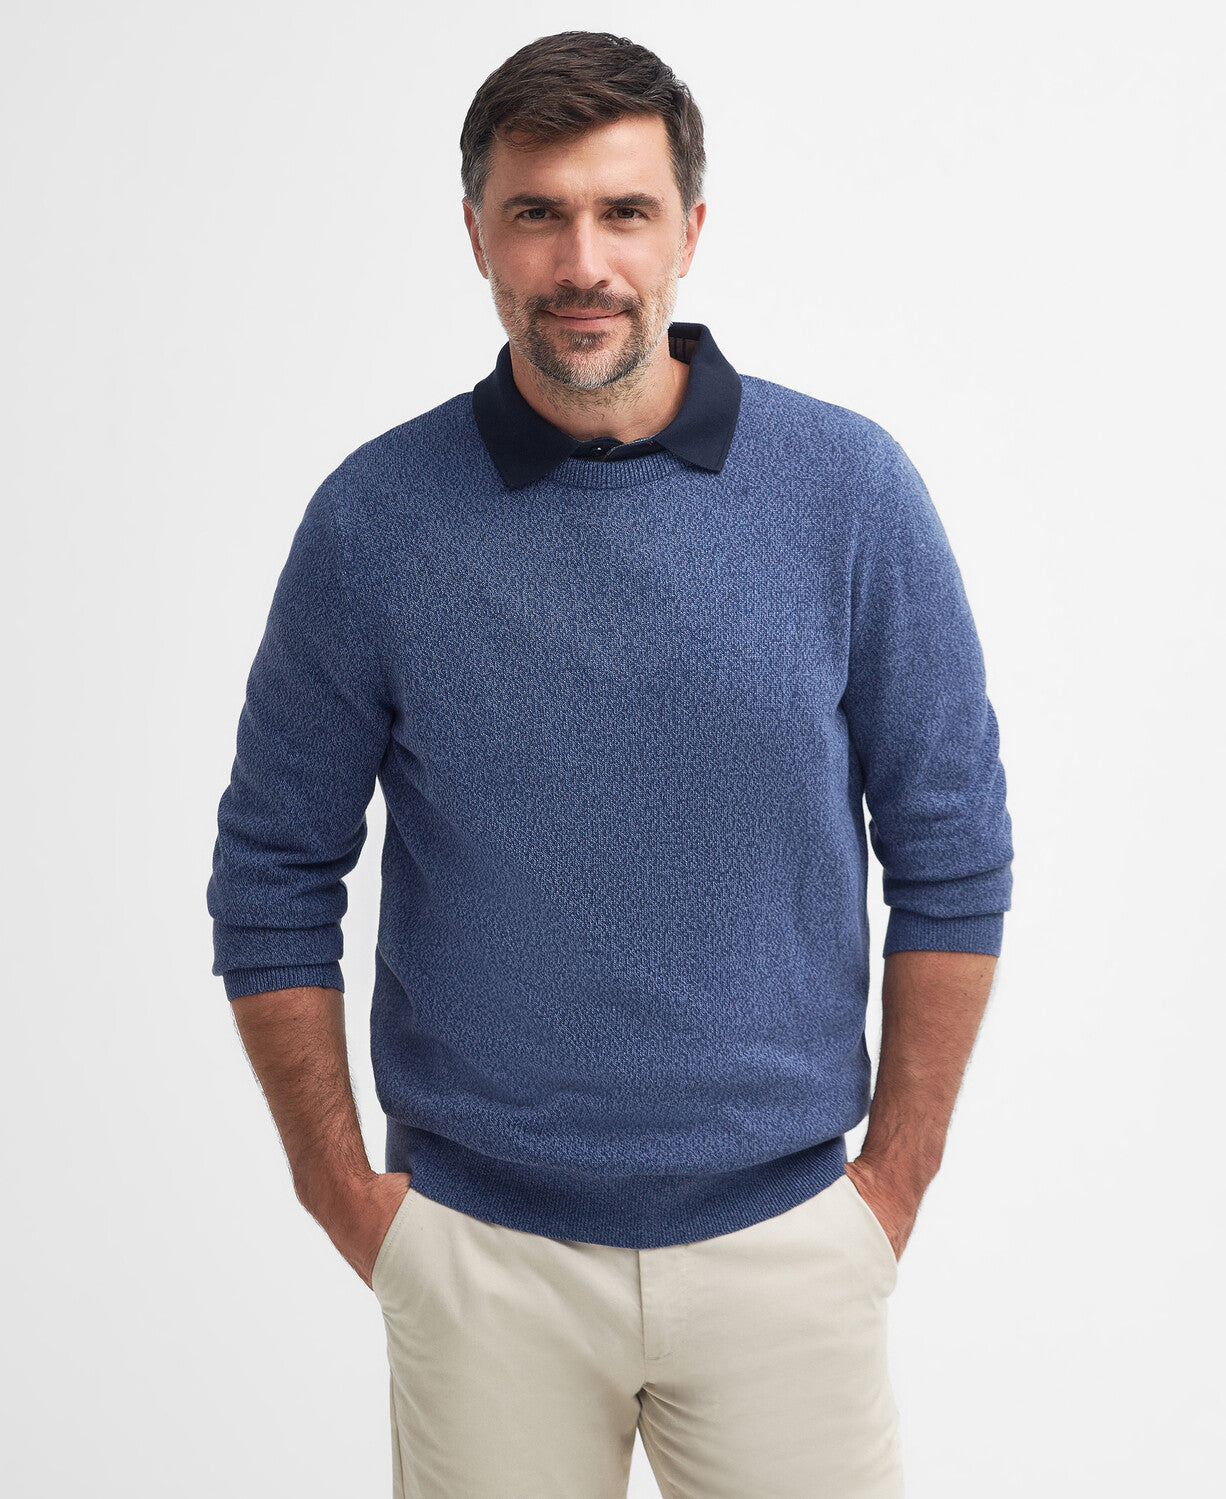 Barbour Whitfield Crew Neck Navy Jumper